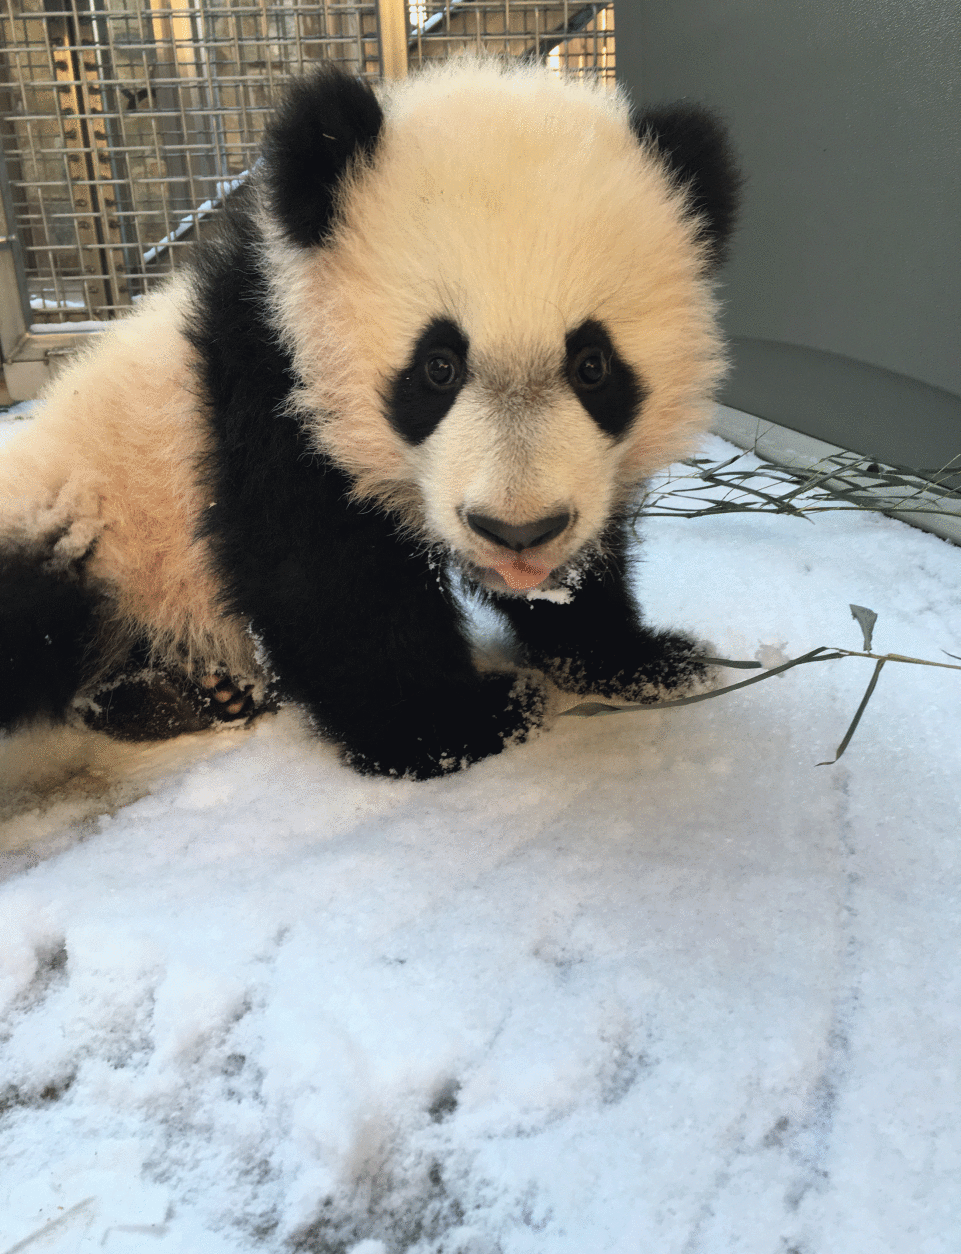 Bei Bei, who is pictured here in January 2016, is growing daily and weighed 37 pounds as of March 17, 2016. Training is underway to teach him to come when called and to respond to commands to assist future veterinary check-ups. (Courtesy Smithsonian's National Zoo/Shellie Pick)